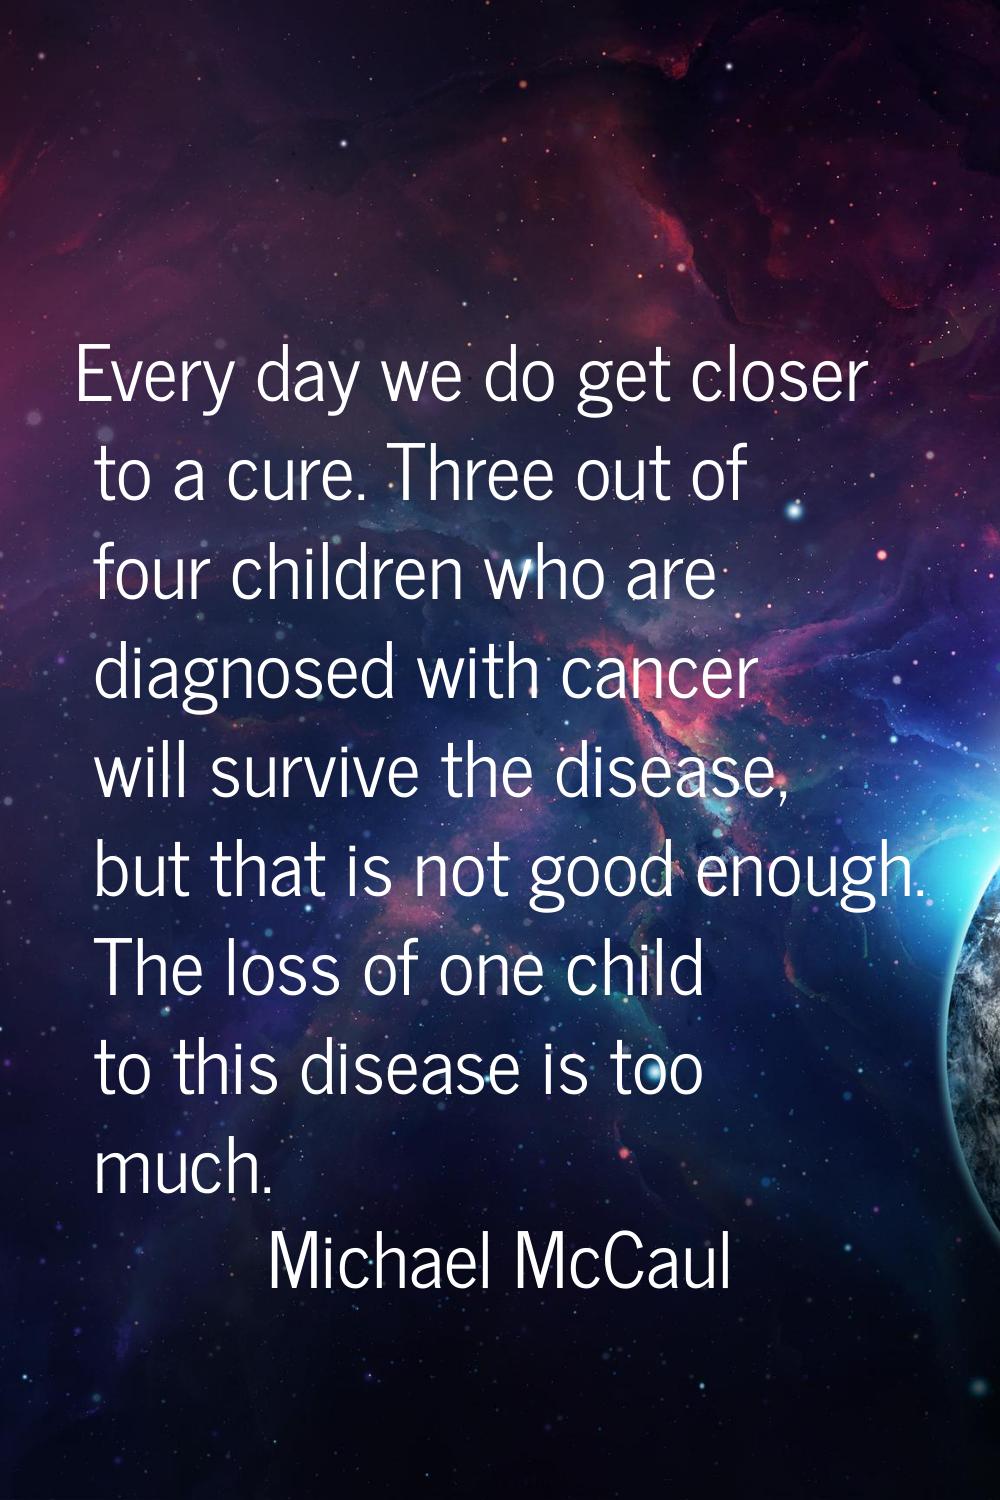 Every day we do get closer to a cure. Three out of four children who are diagnosed with cancer will